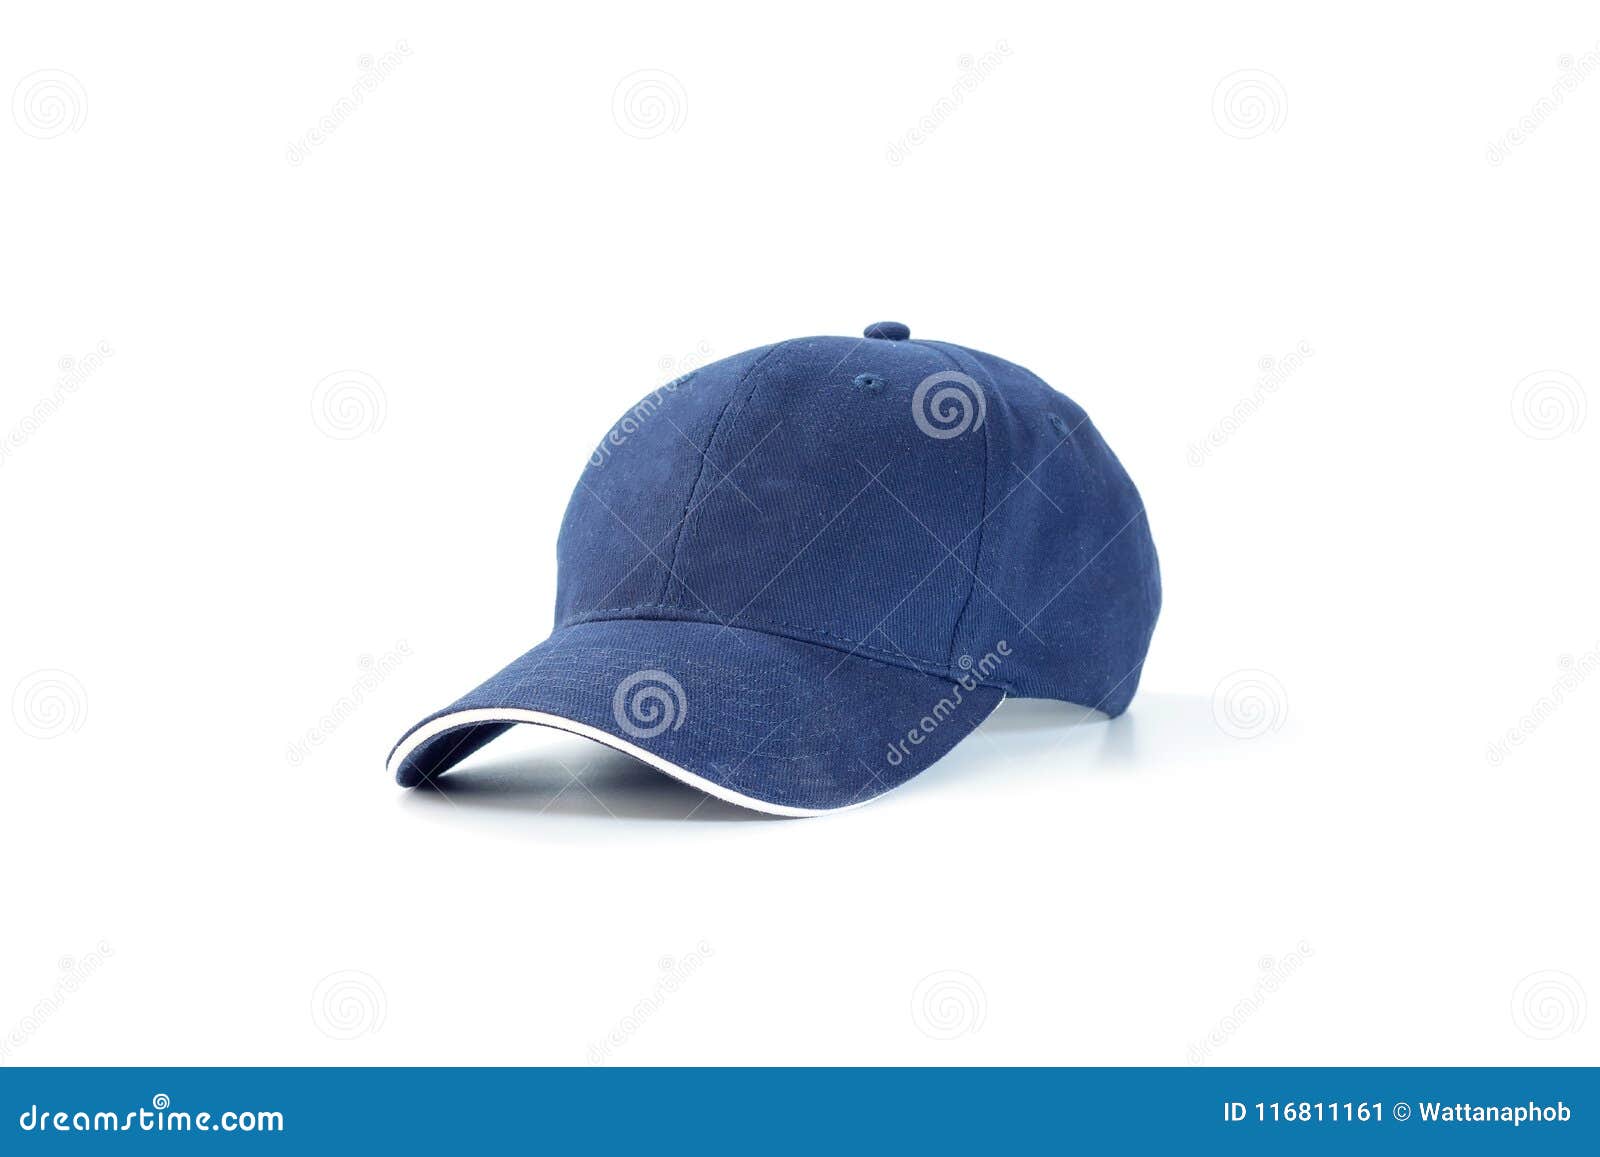 Blue Fashion and Baseball Cap Stock Image - Image of template, helmet ...